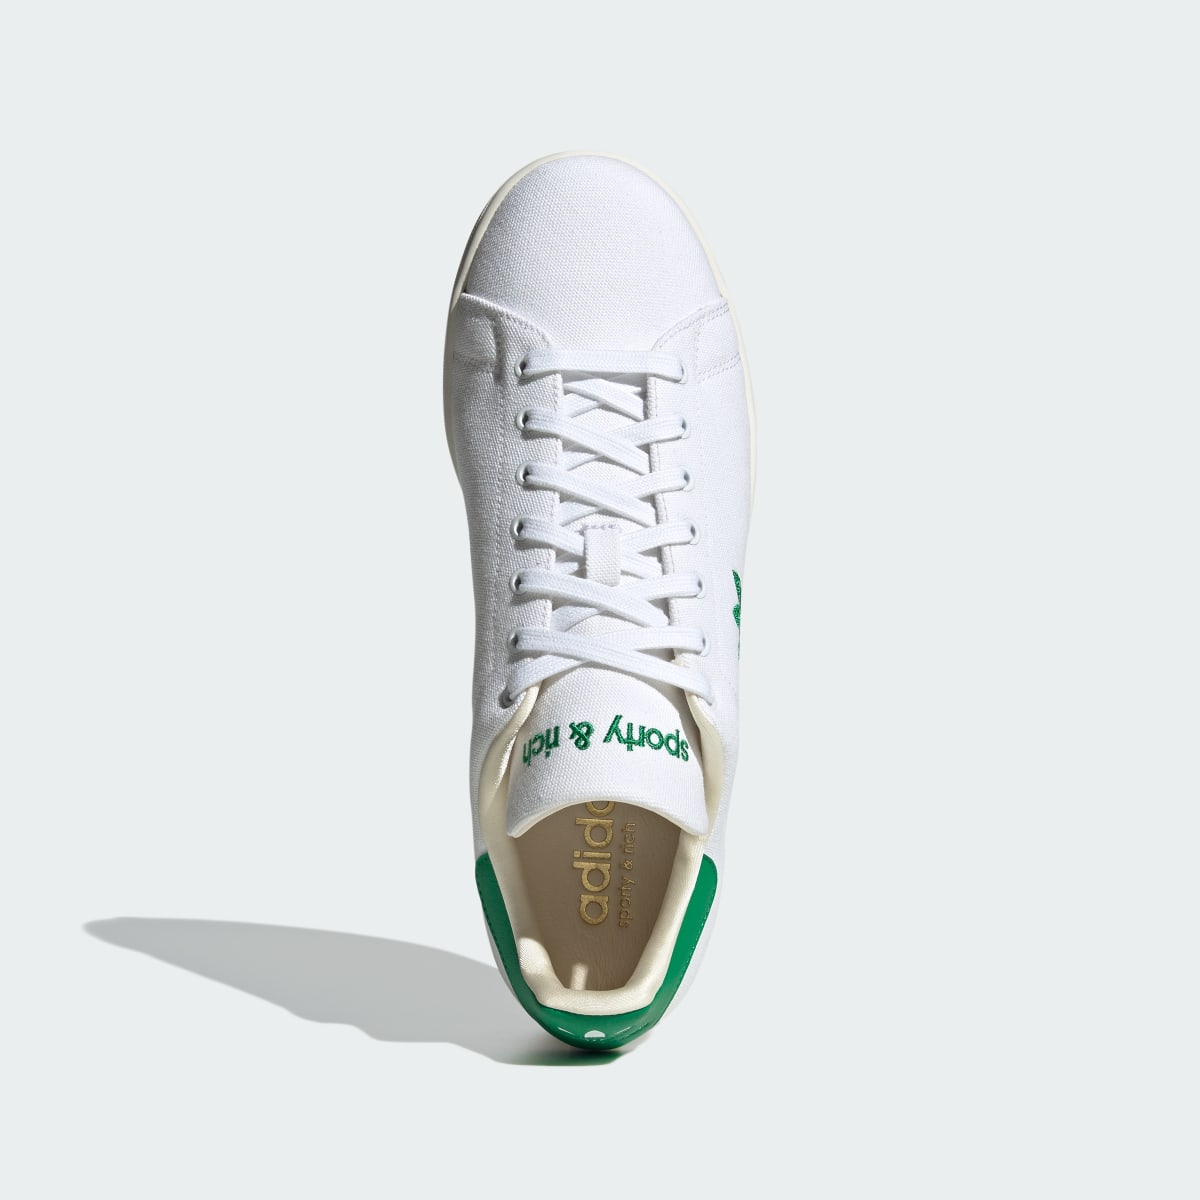 Adidas Chaussure Stan Smith Sporty & Rich. 4